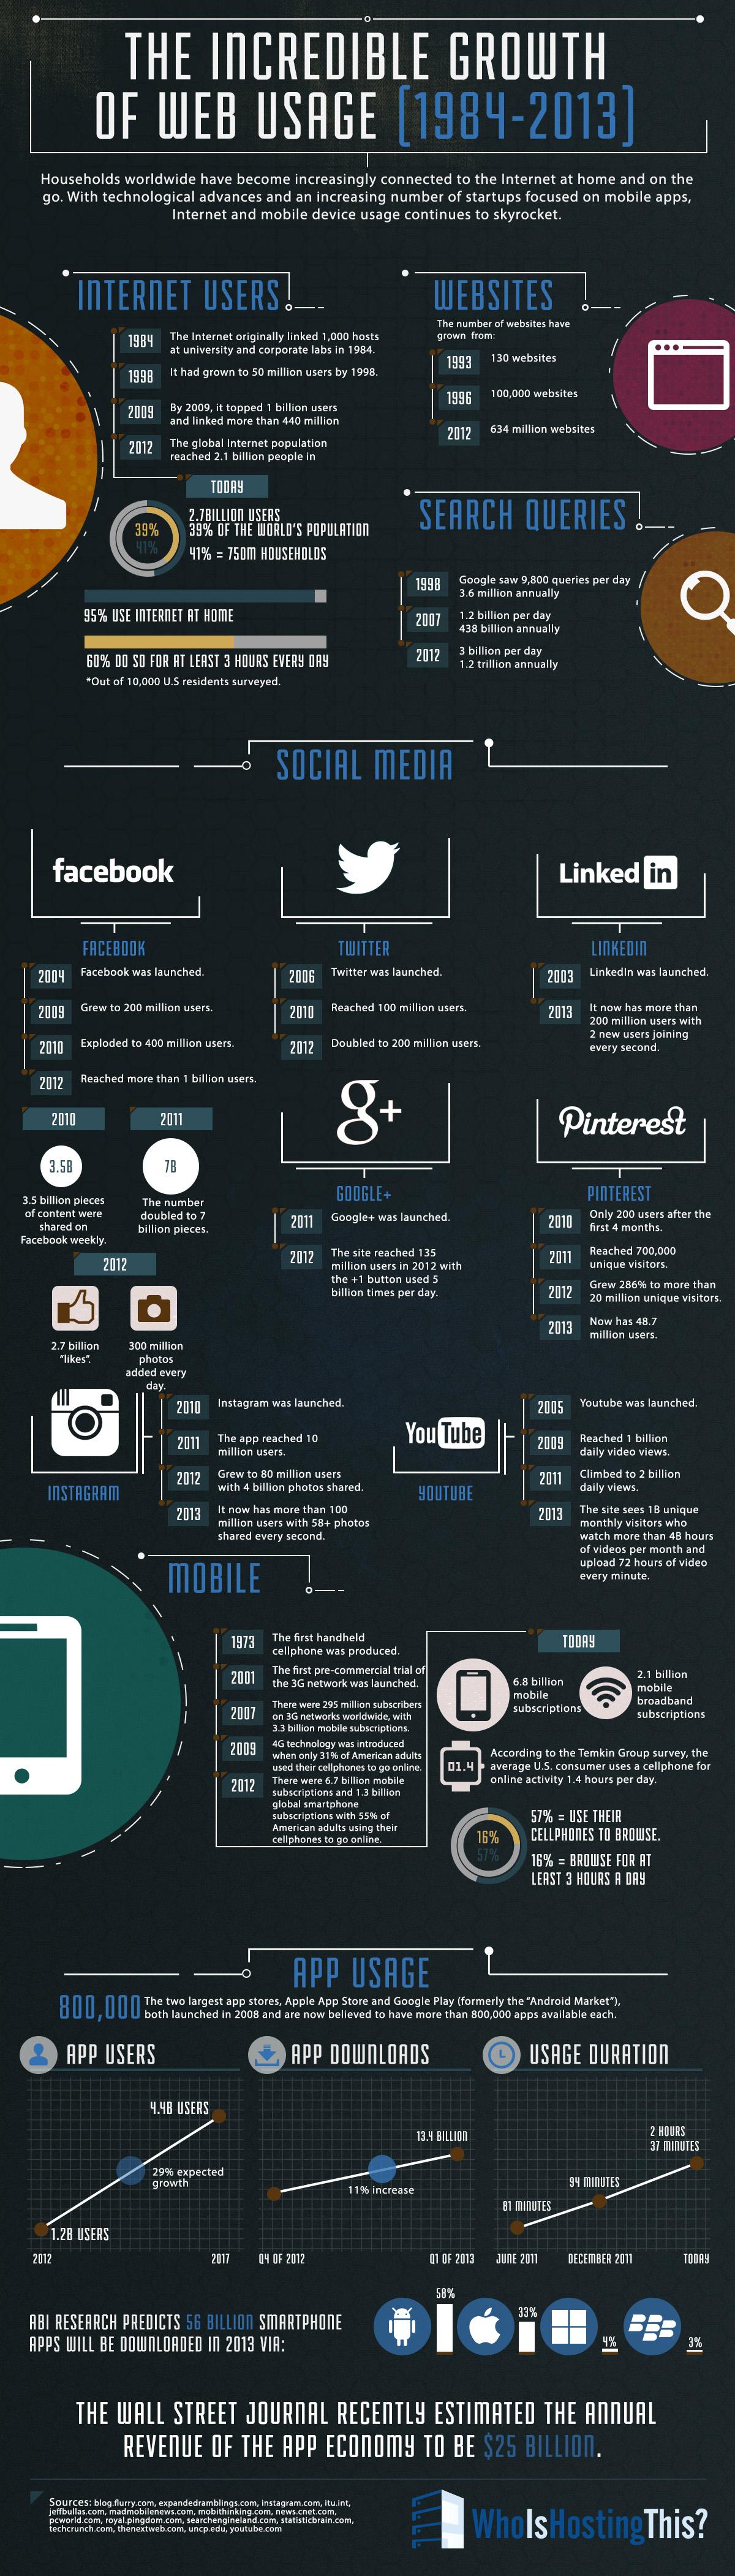 The Incredible Growth of Web Usage [1984-2013] (Infographic)